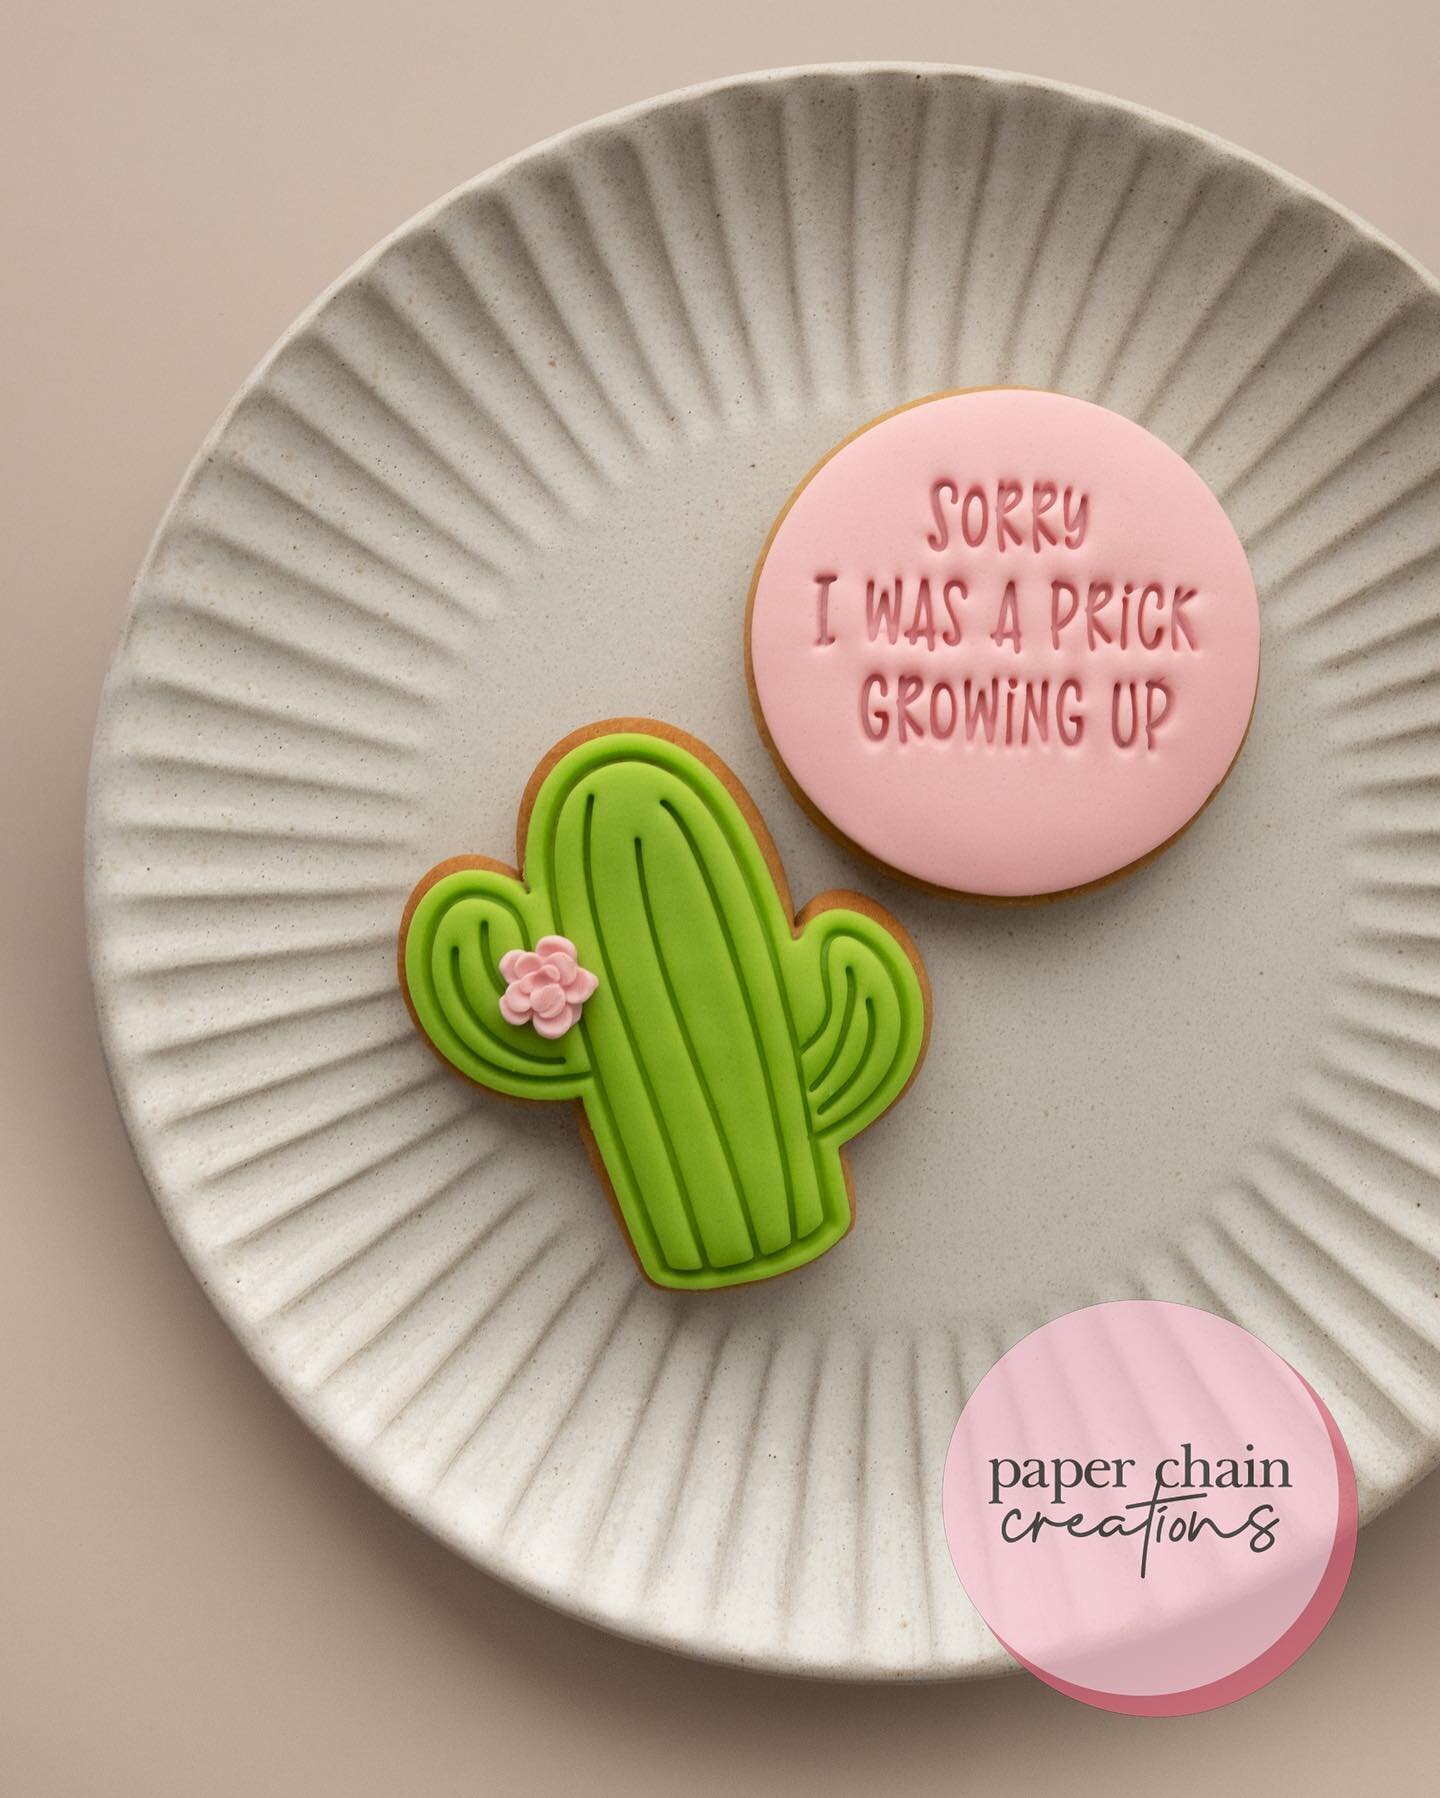 💕 cactus 💕
.
Another cheeky one for Mother&rsquo;s Day! This would also be great for Father&rsquo;s Day and parents birthdays. 
.
#fondantcookies #cookiecutters #cookies #paperchaincreations #customcookies #baking #fondant #cookiedecorating